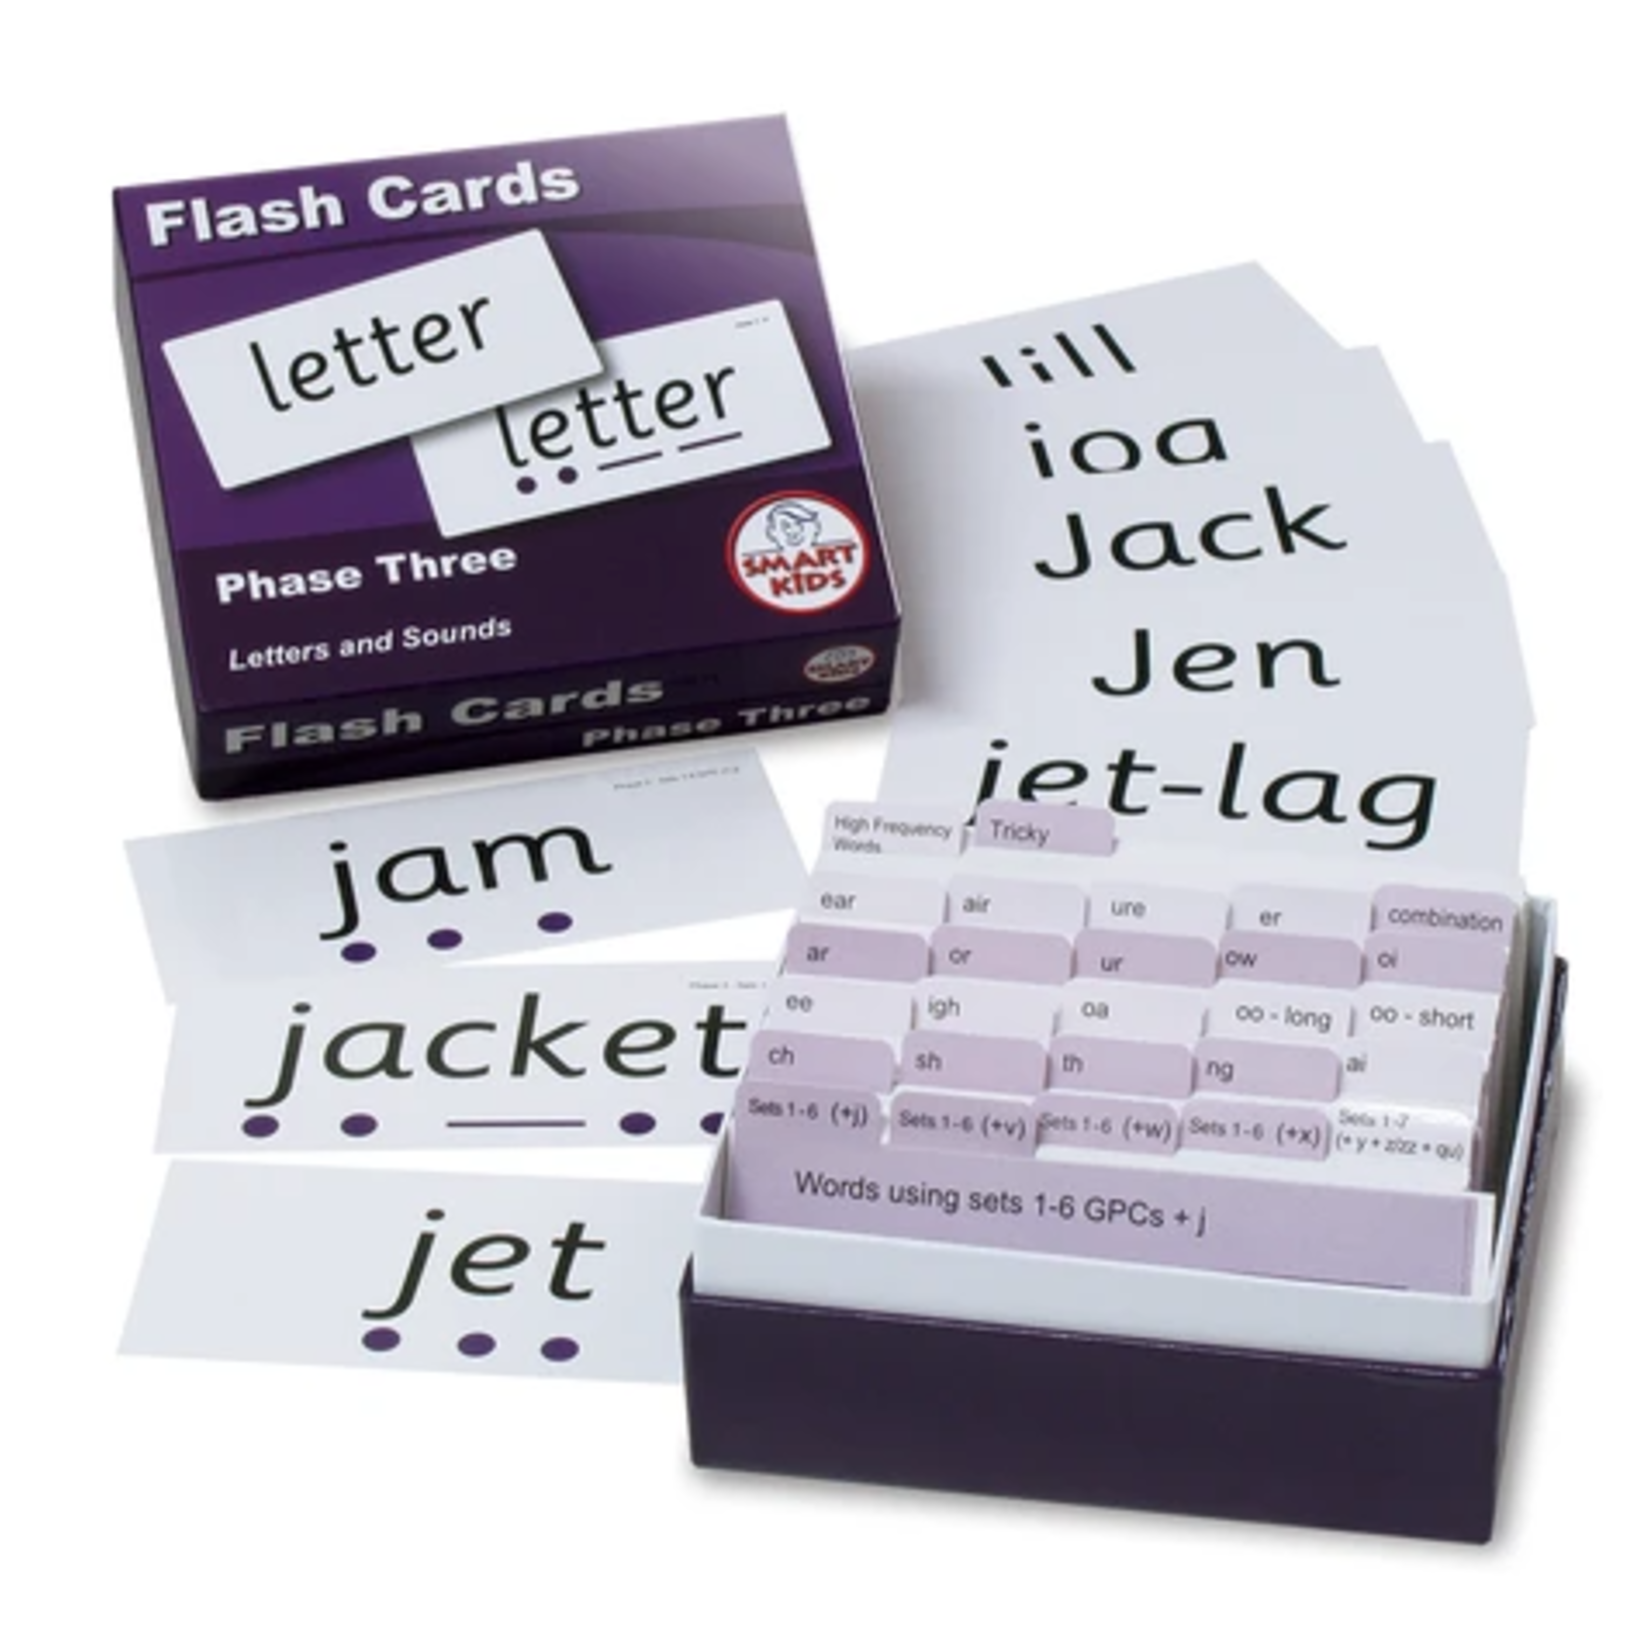 Letters and sounds Flash Cards